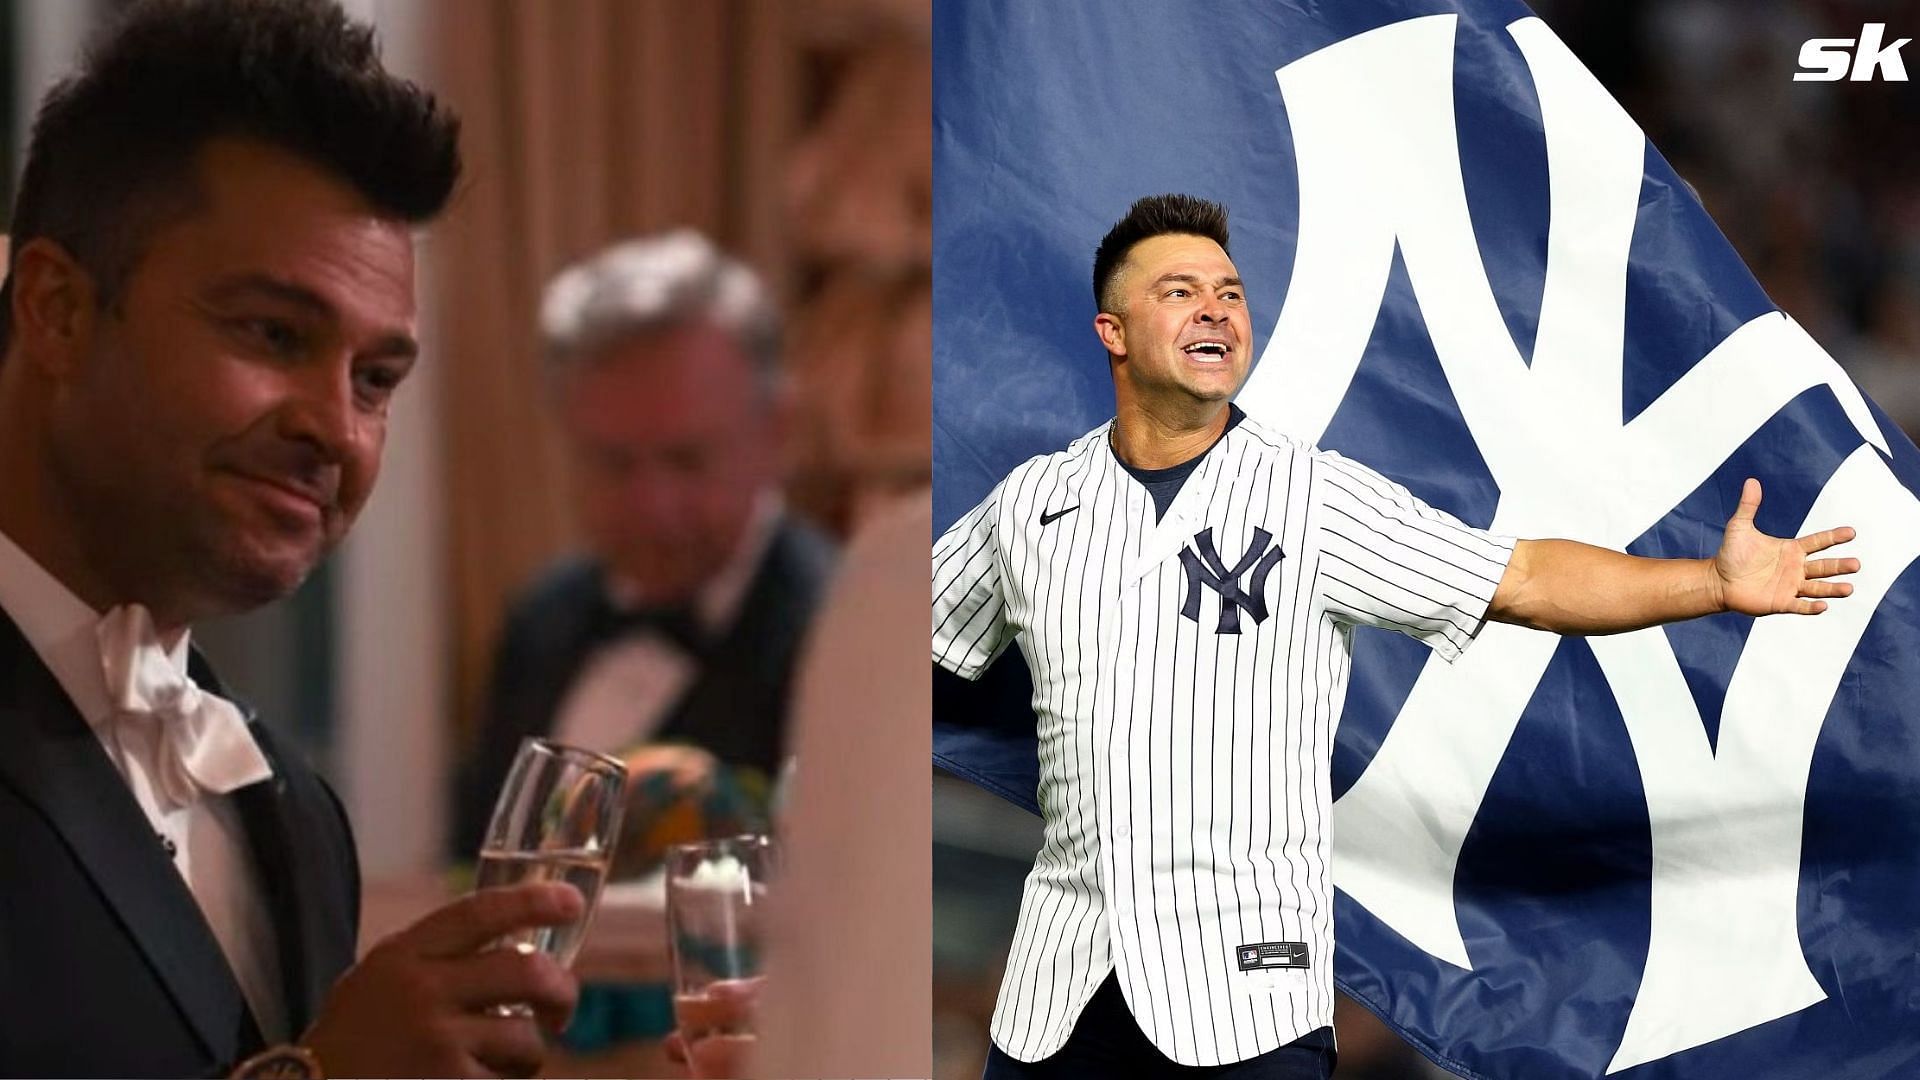 Memorable nights with the Yankees to starring in reality TV: The story of Nick  Swisher and his run-ins with TV shows 'HIMYM' and 'Sweet Magnolias